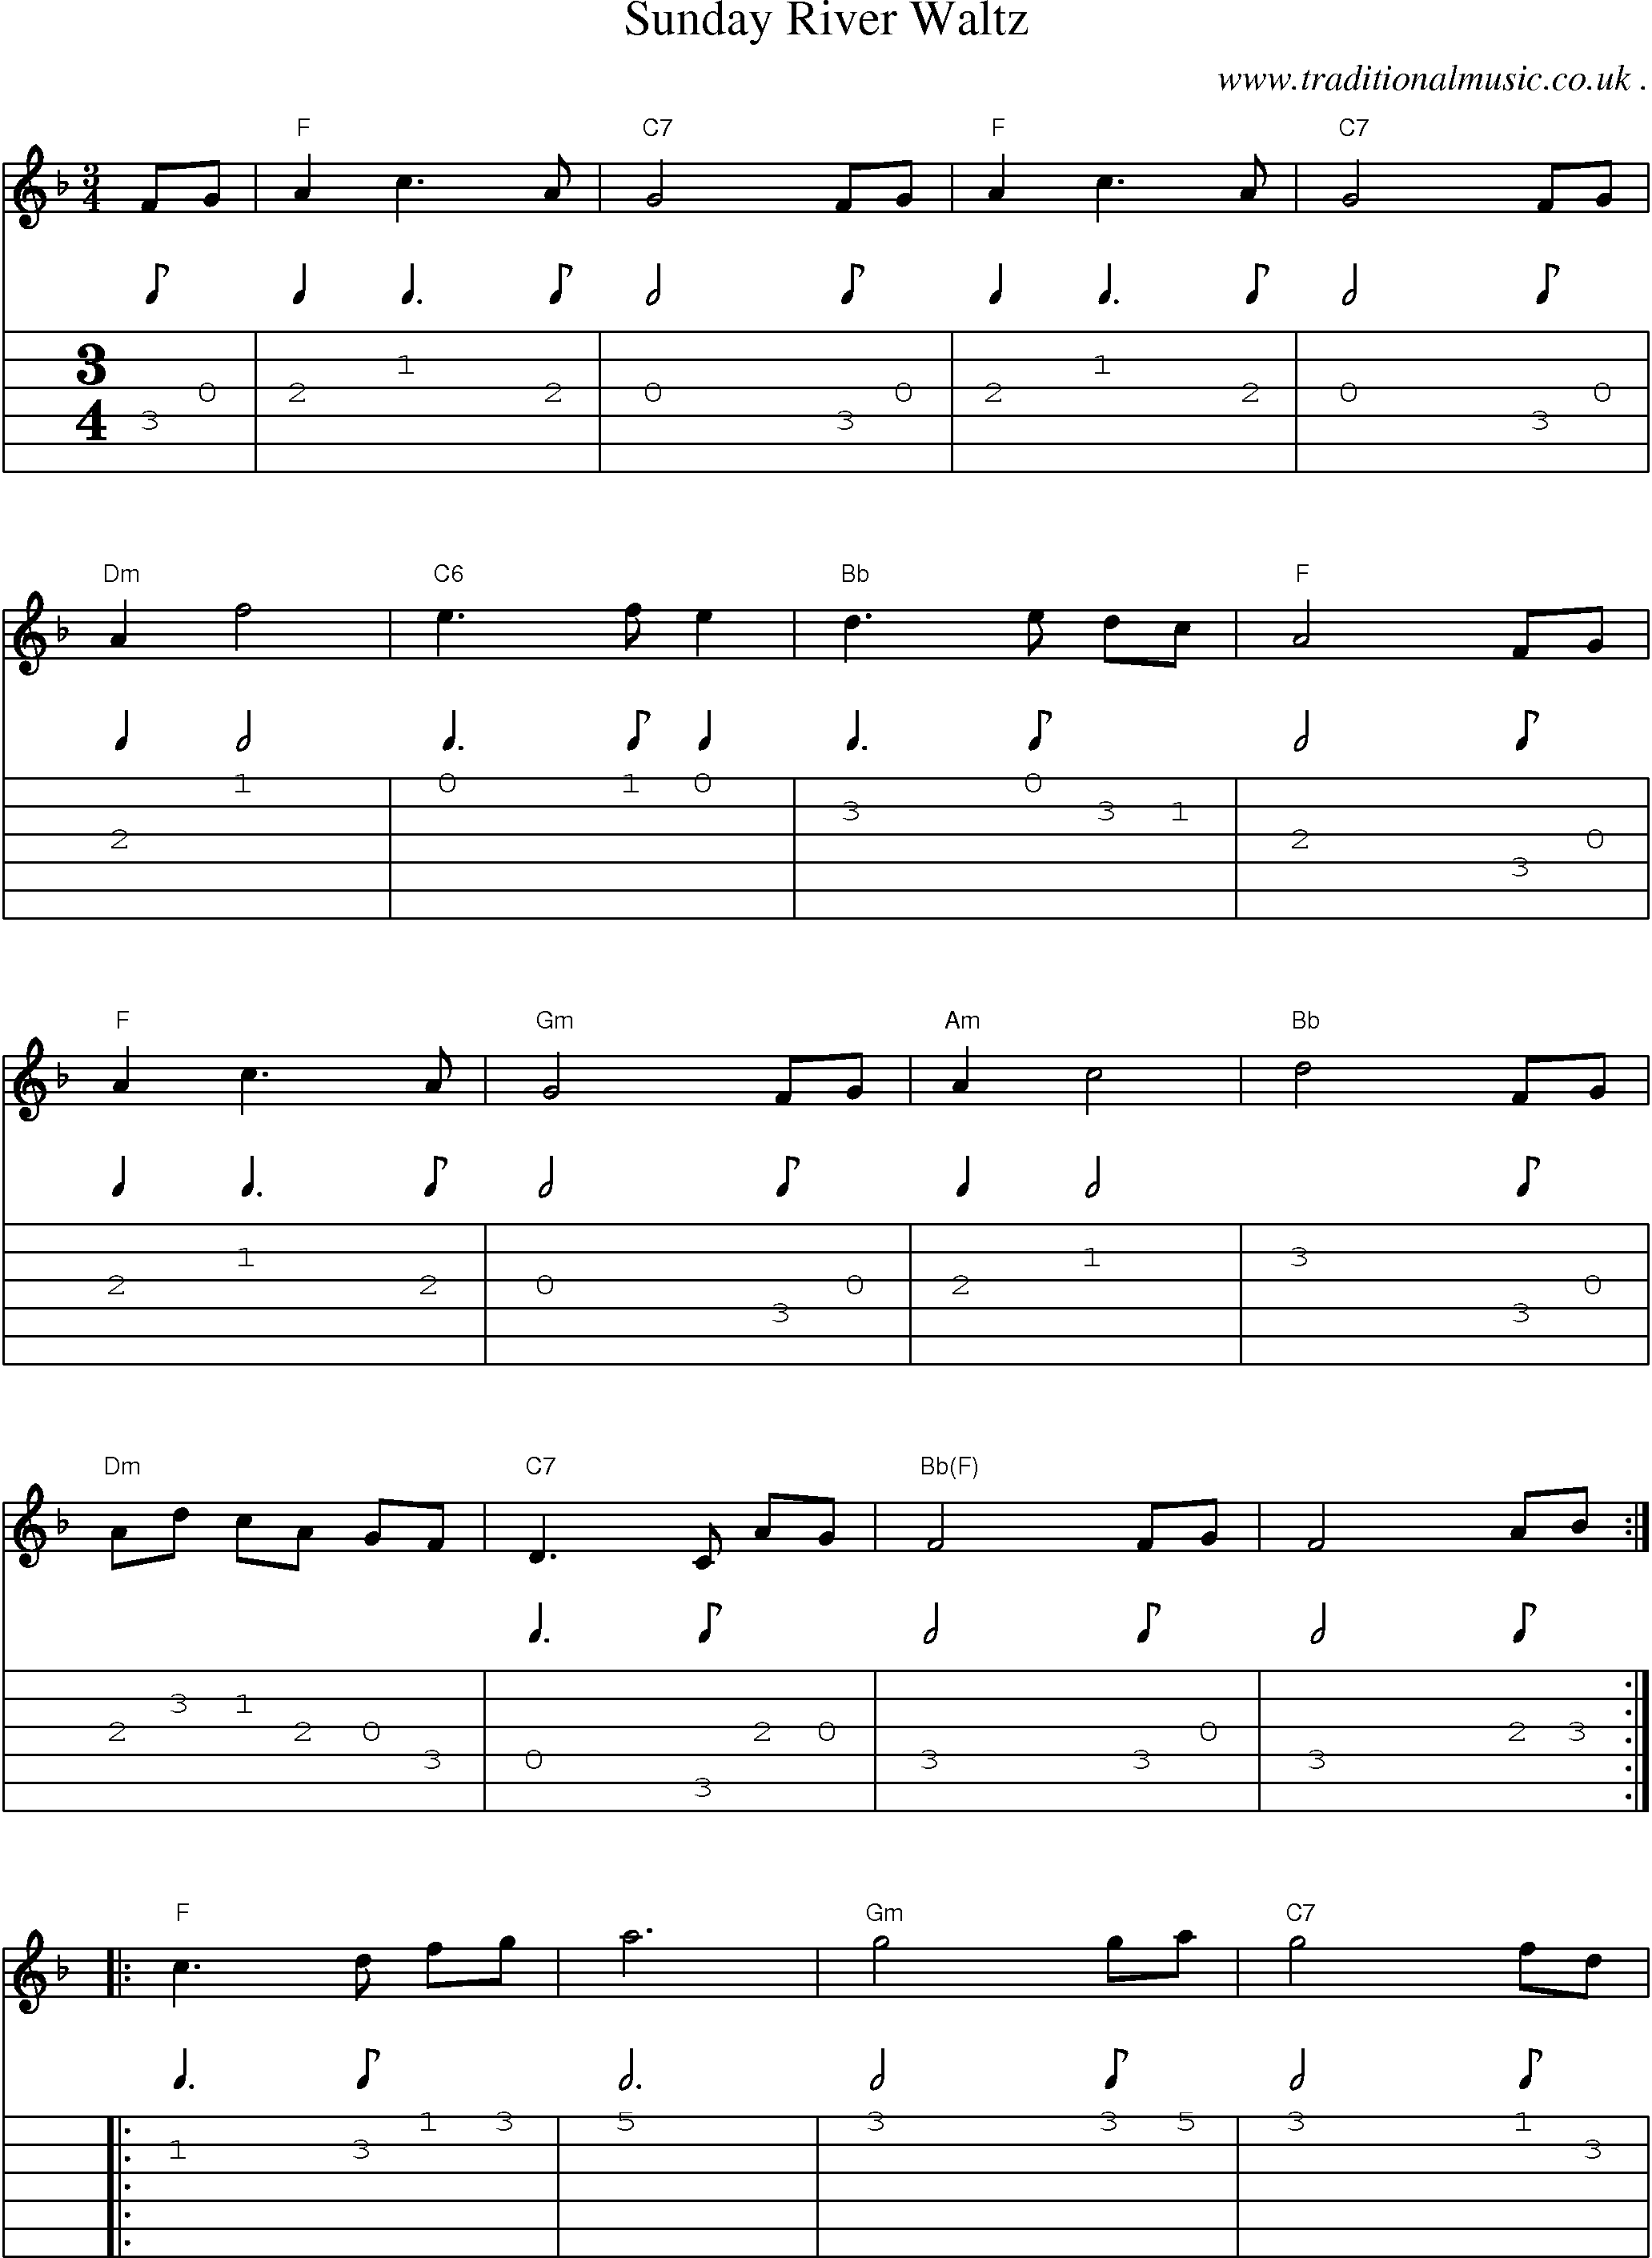 Music Score and Guitar Tabs for Sunday River Waltz